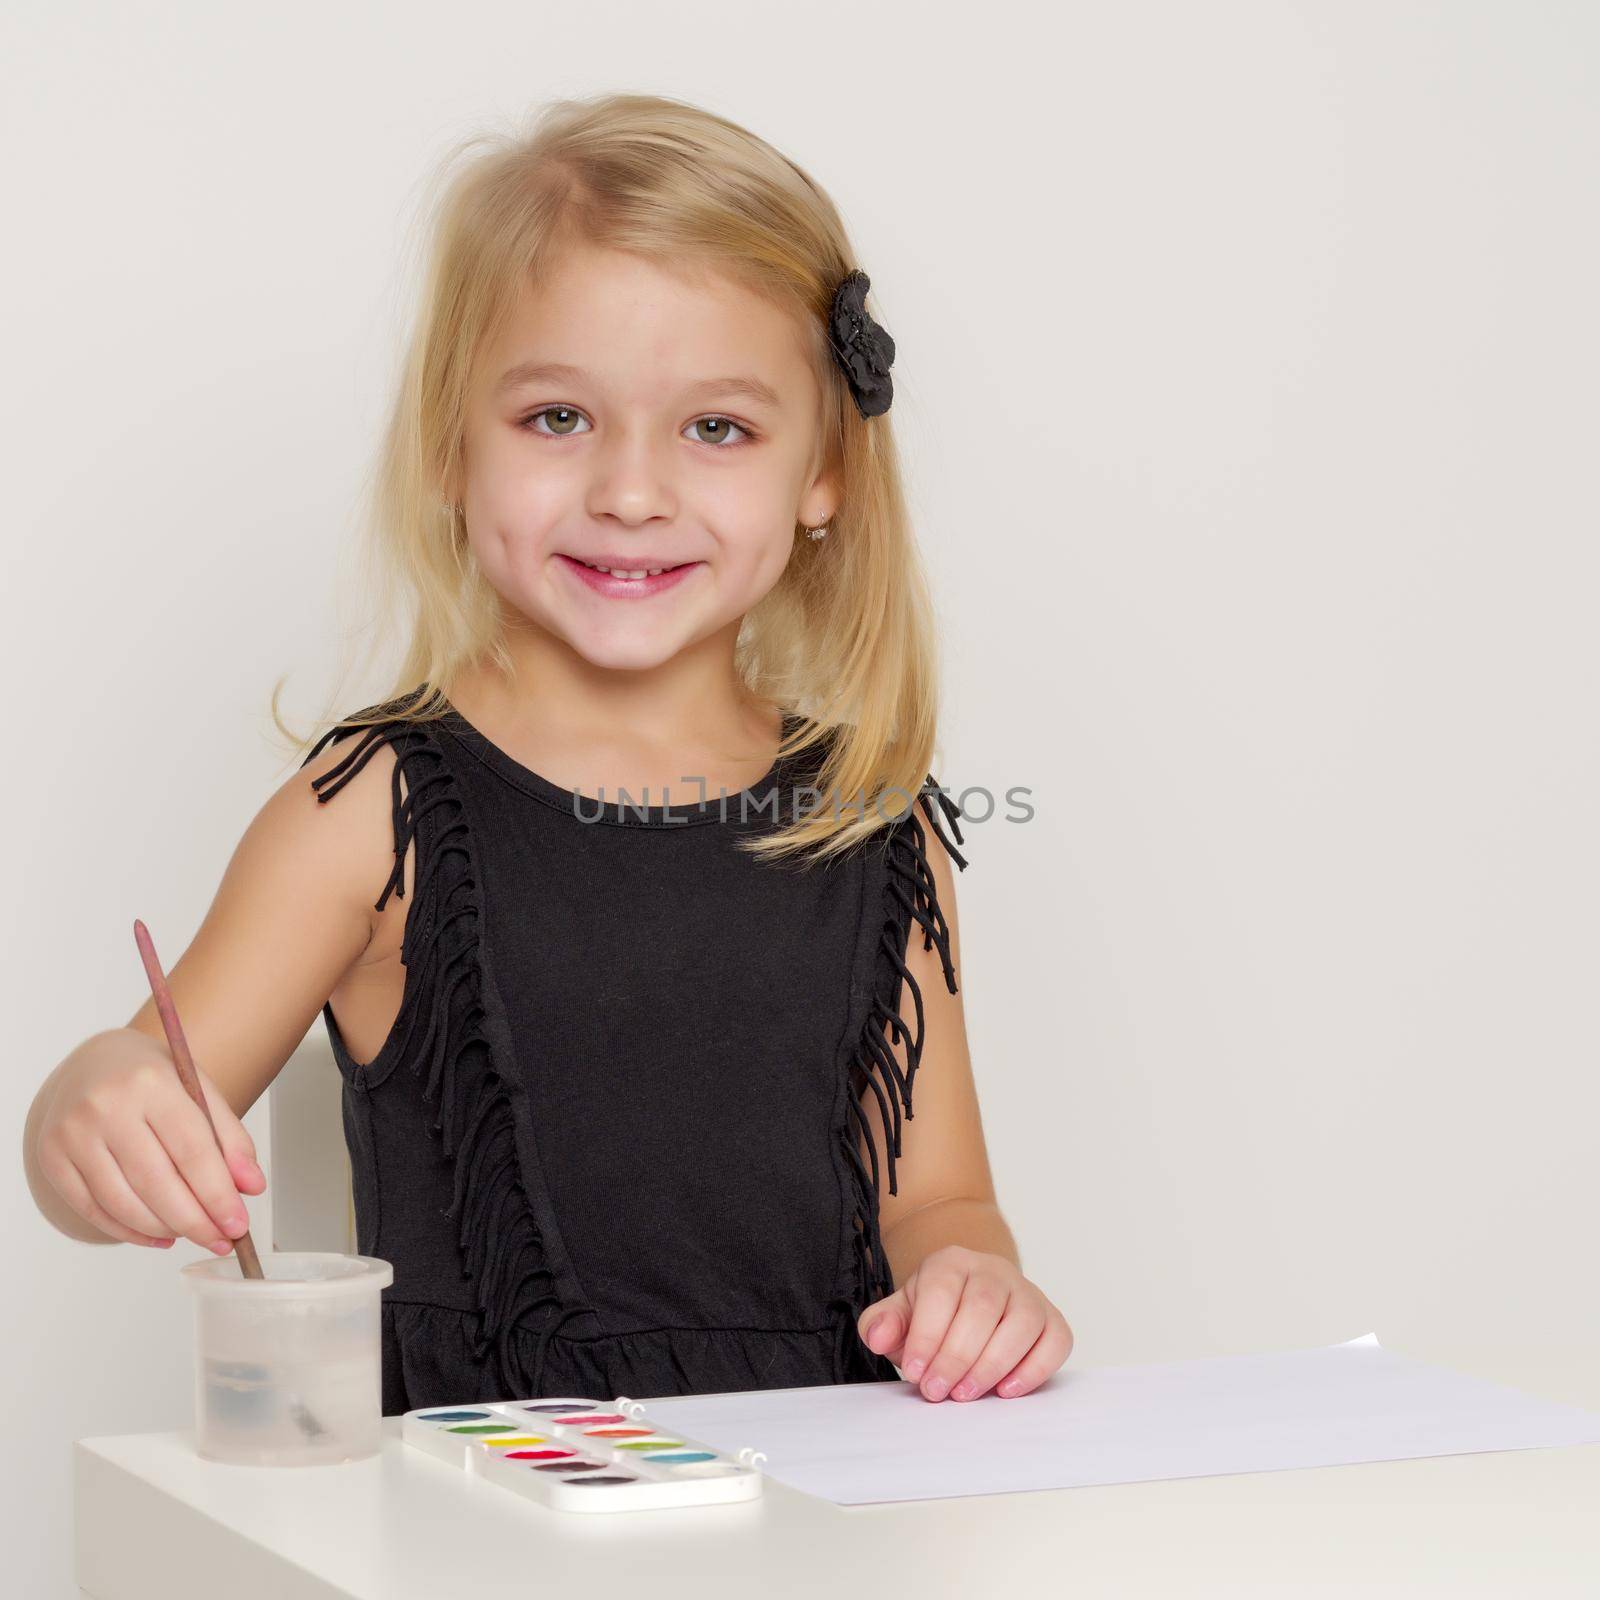 Joyful little girl draws with a brush and paints. The concept of children's creativity.